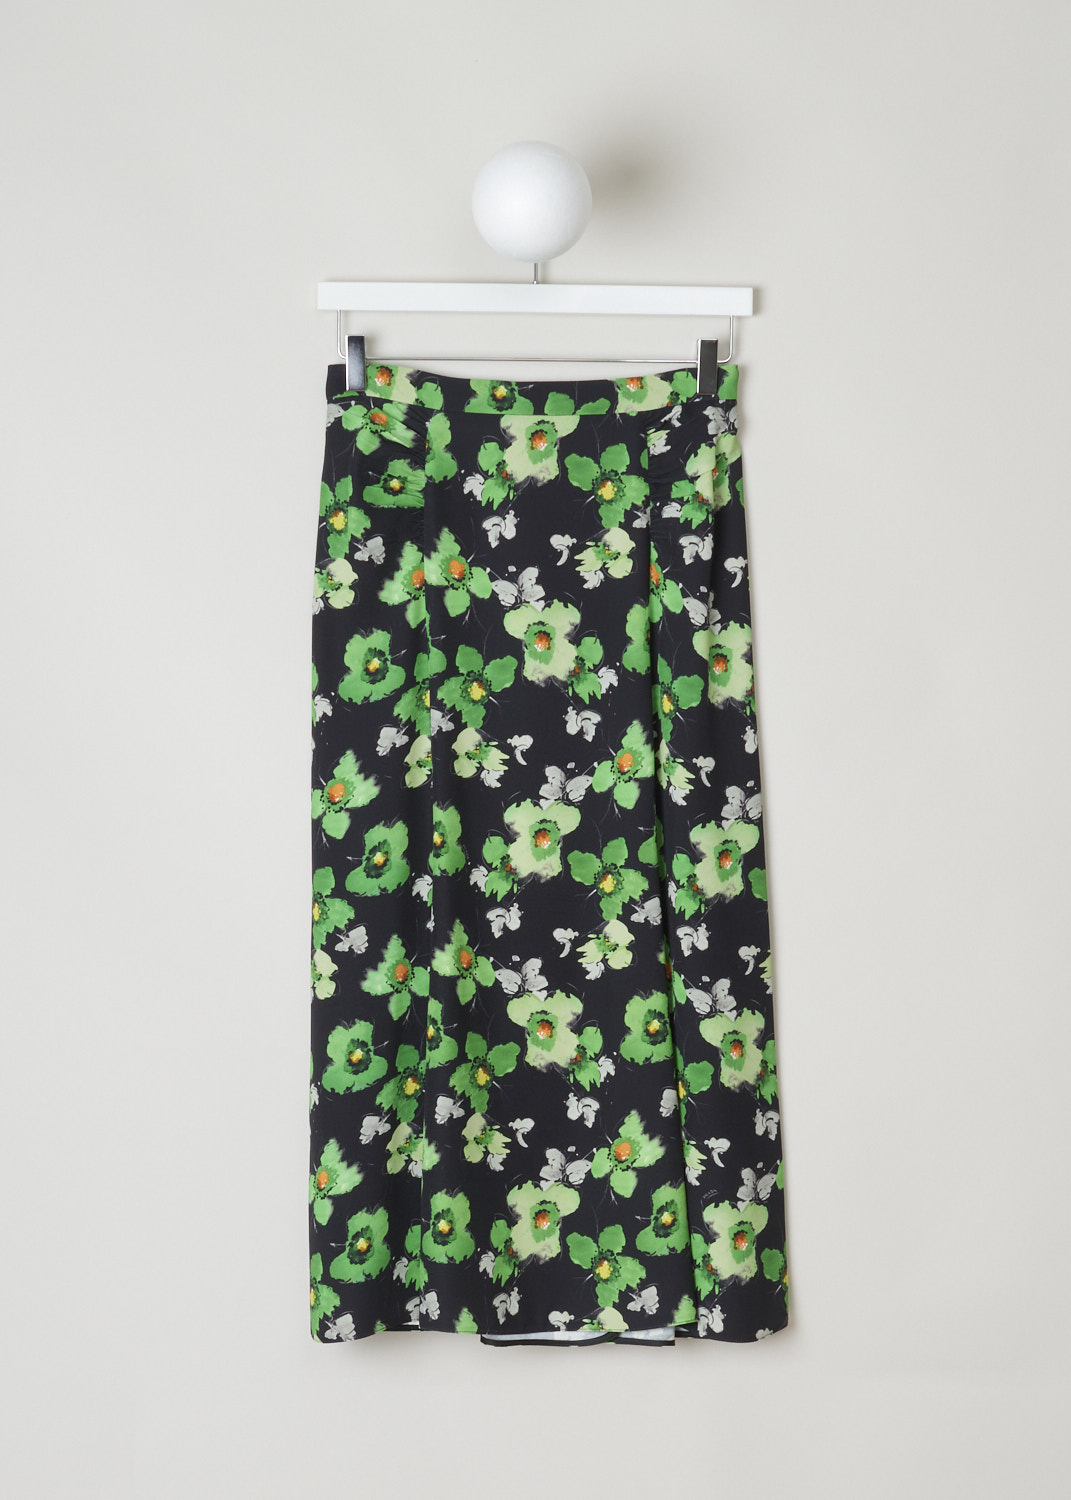 Prada, Black semi-circular skirt with green floral motif, sable_raso_narc_P152S_F077U_smeraldo, print, front, Starting from the top this mid-length skirt comes with a narrow waistband, with the fastening option being on the left side. The seams coming of the waistband are ruched and adds more excitement to this model. Furthermore, this model does flare out, and has a short split on the back.